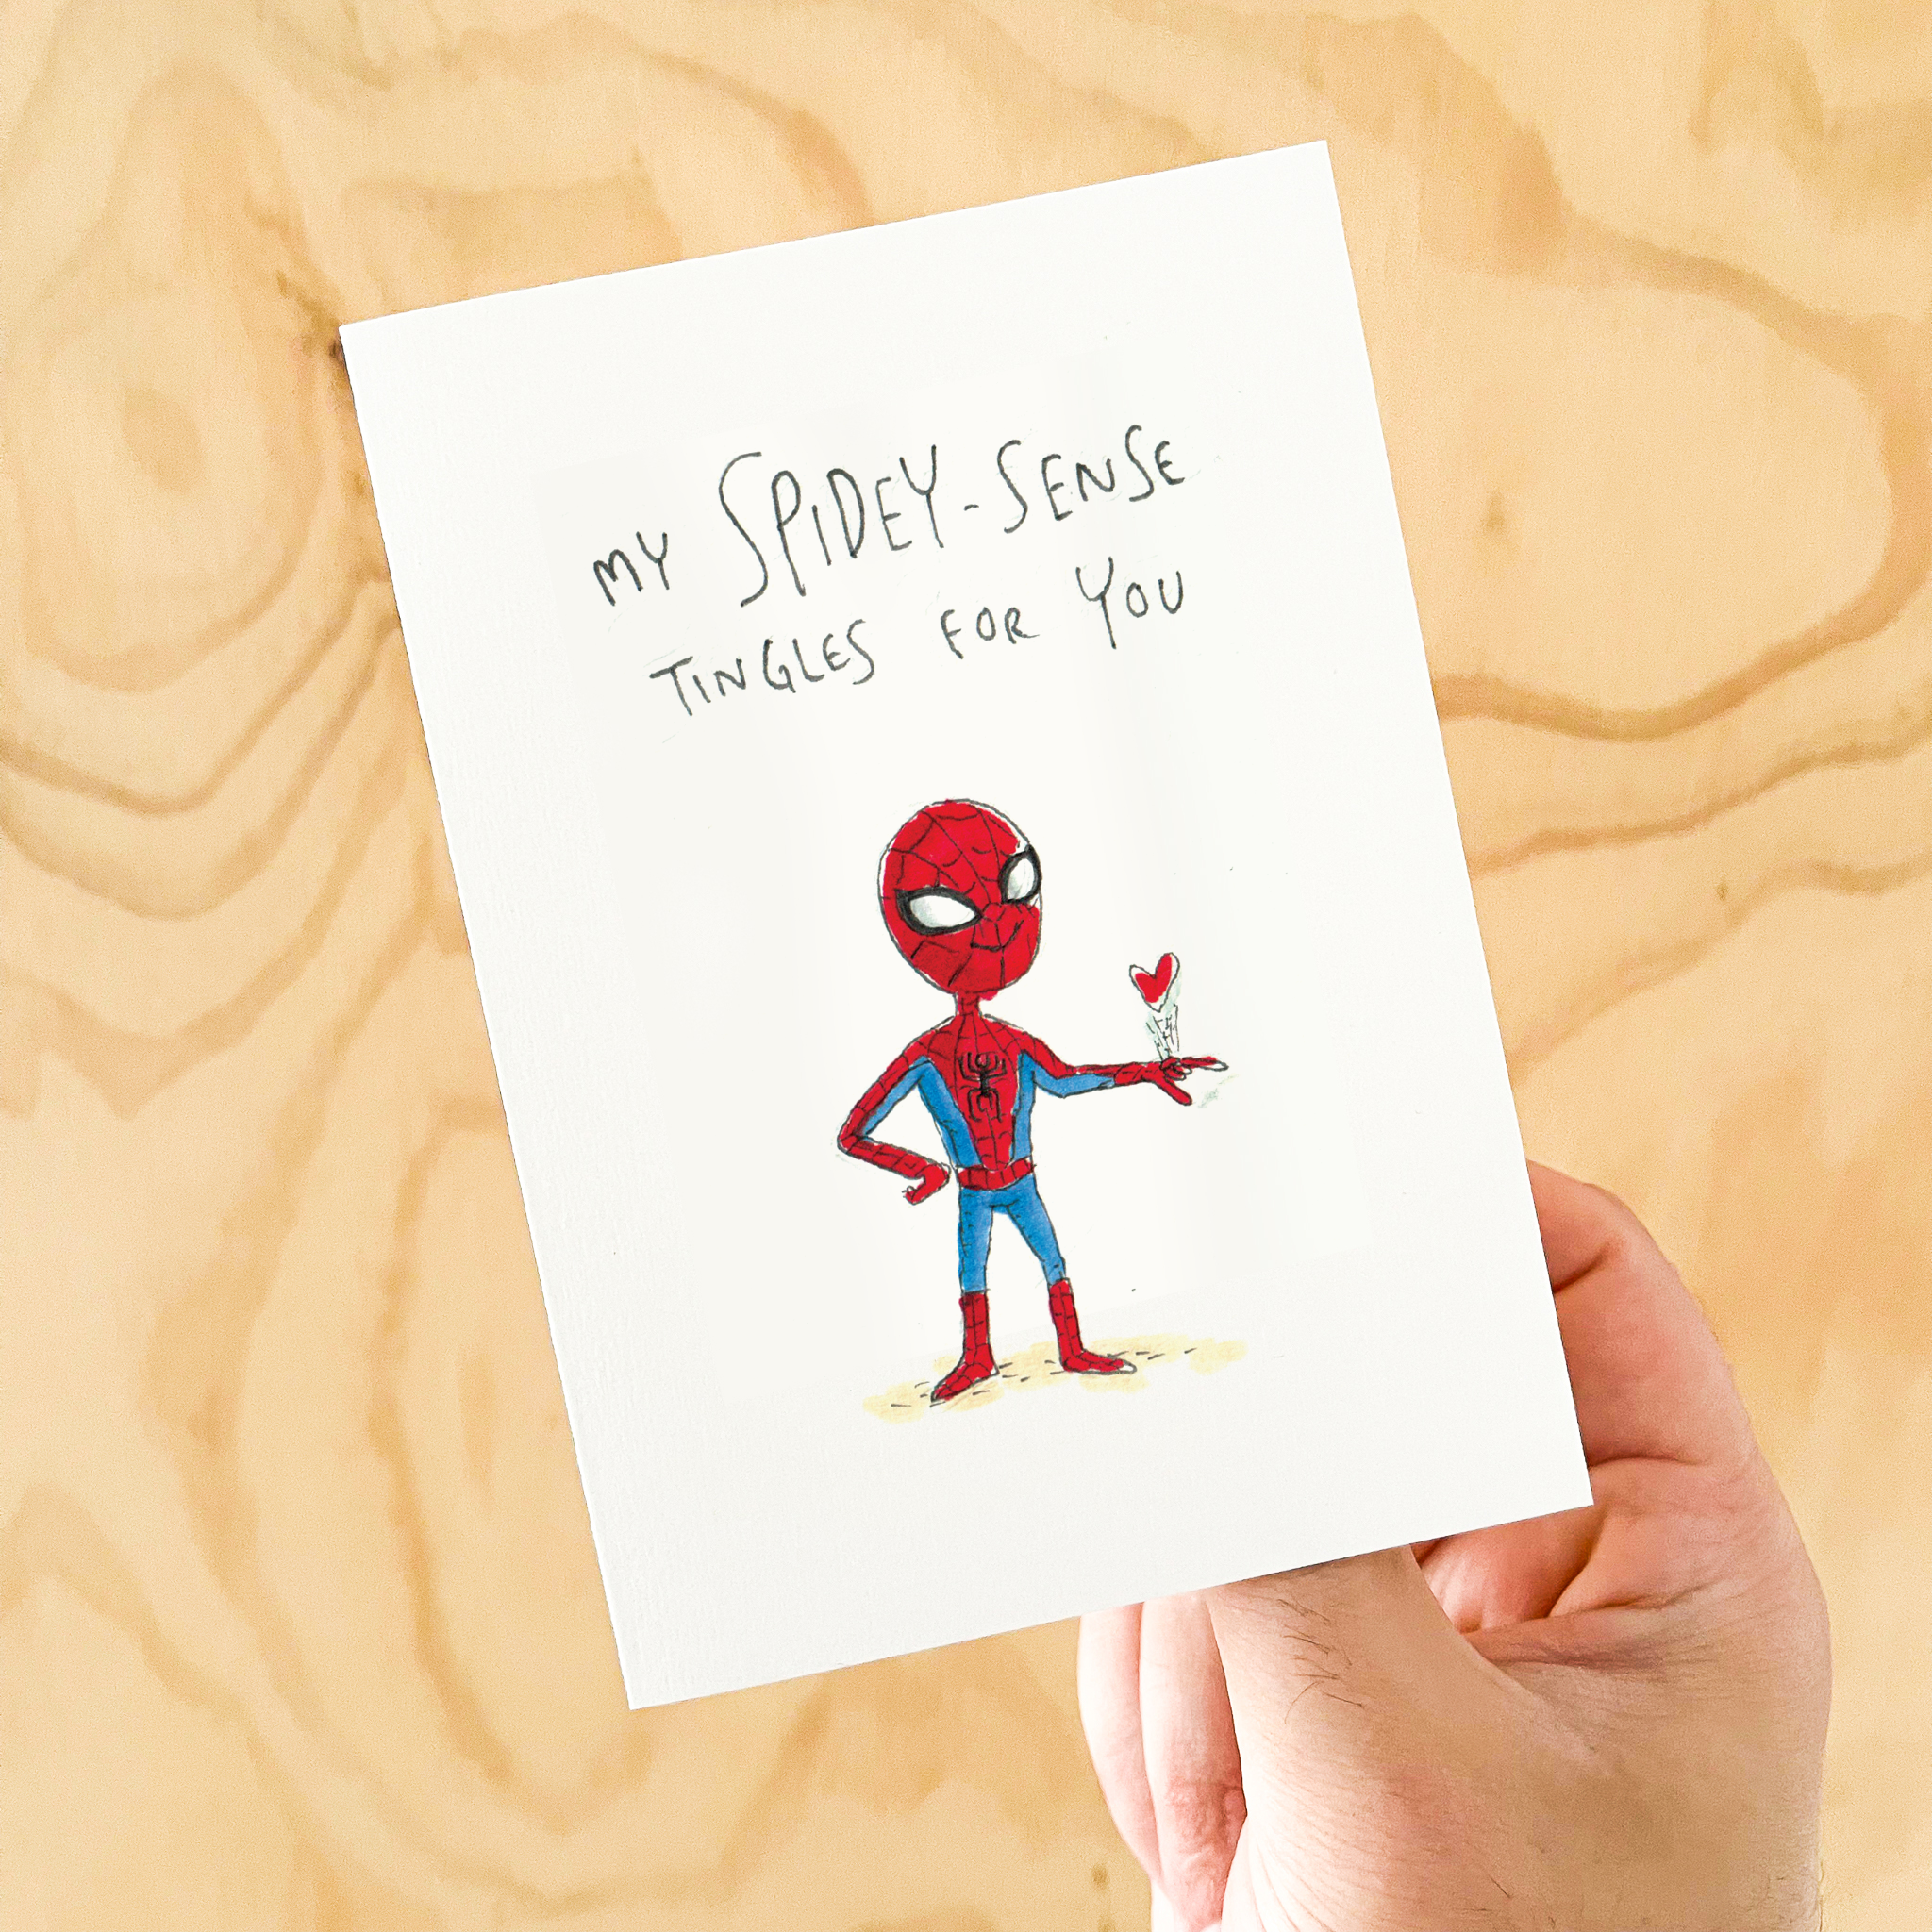 My Spidey-Sense Tingles For You